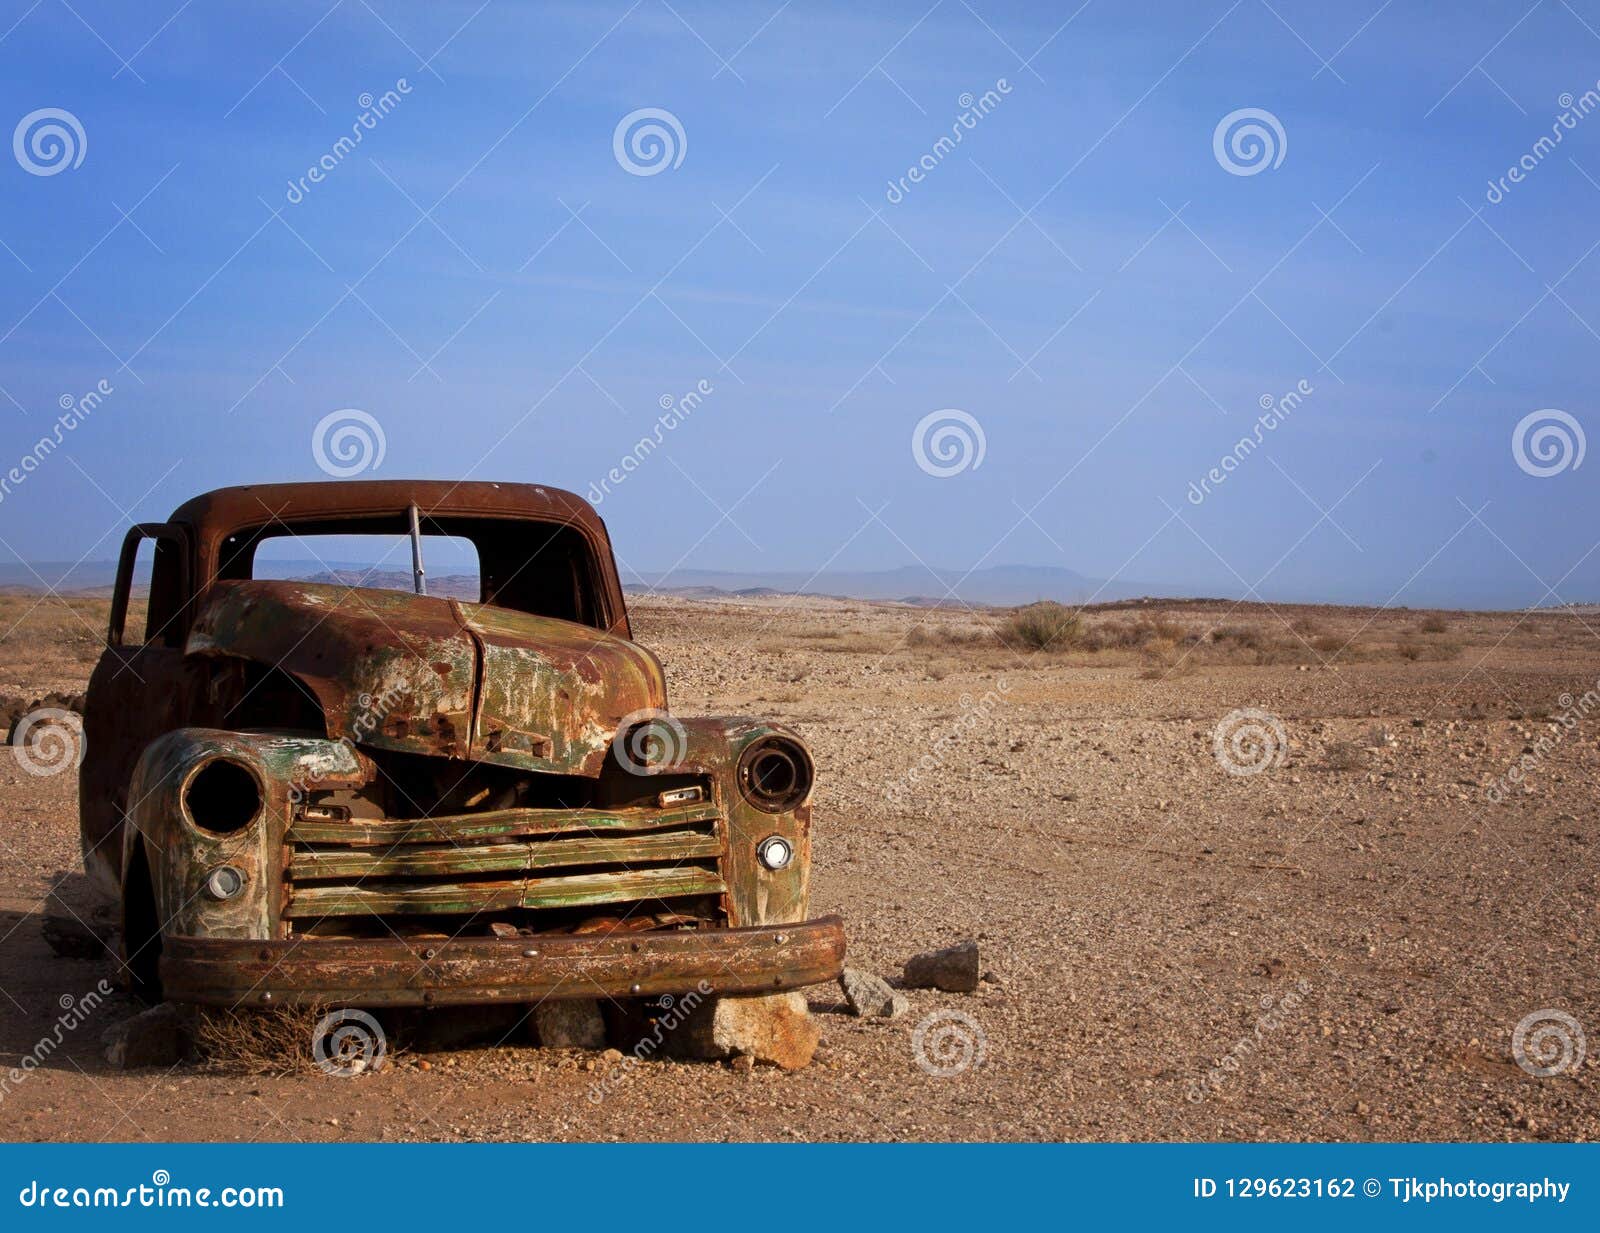 old rusted car desserted in the desert